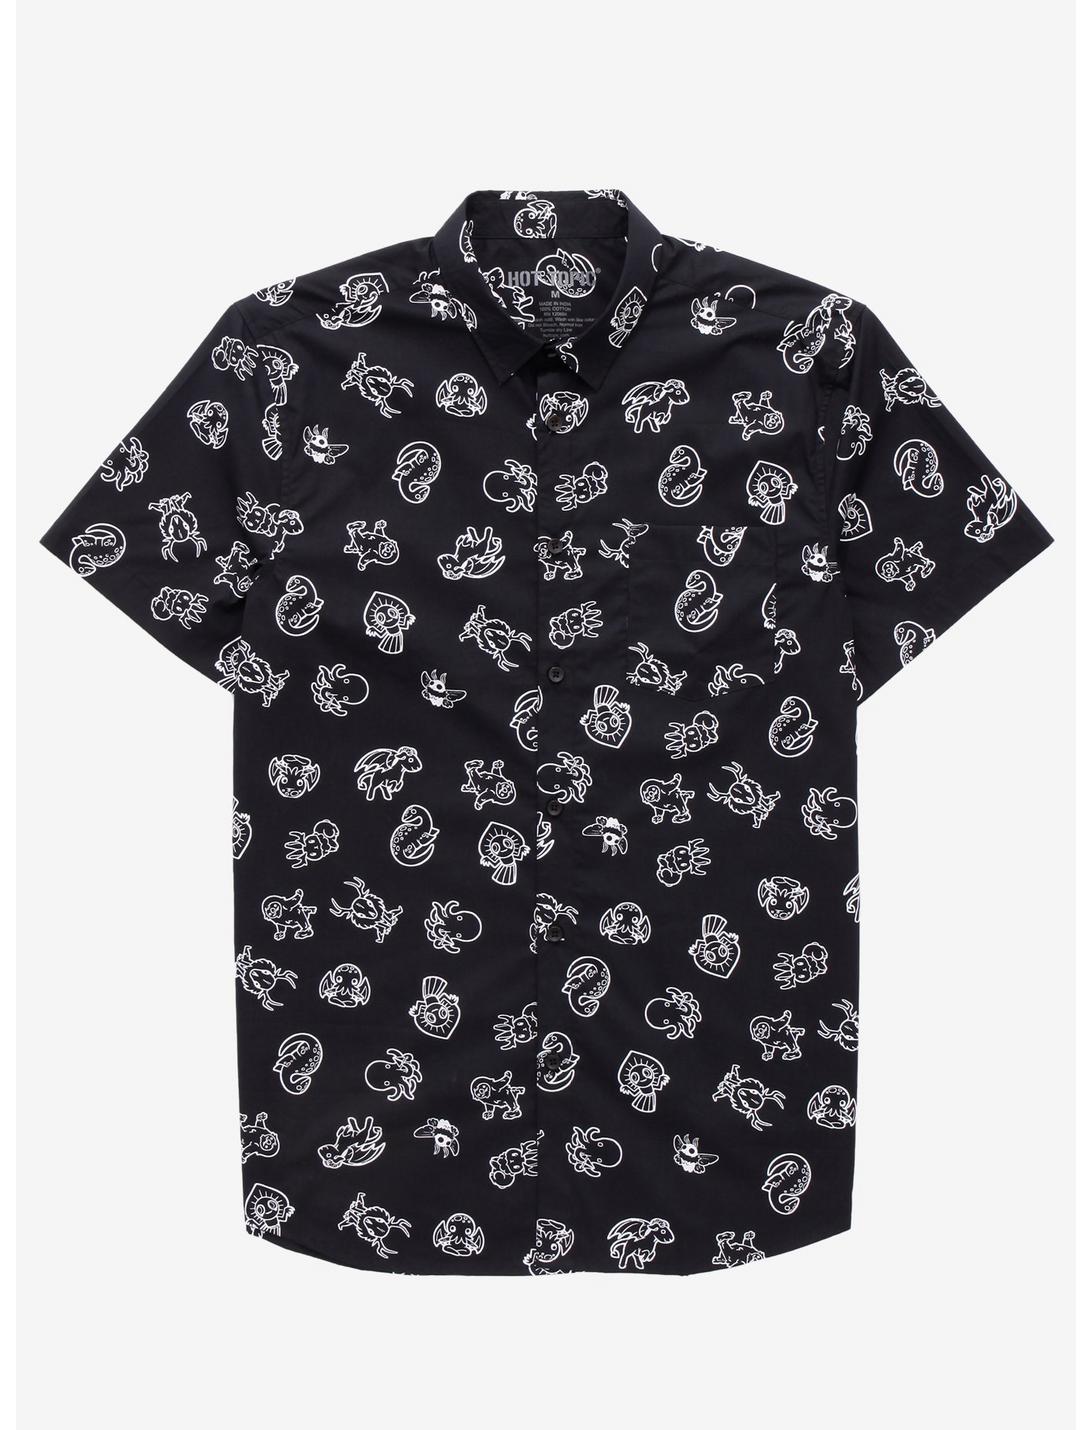 Black & White Cryptids Woven Button-Up, BLACK, hi-res